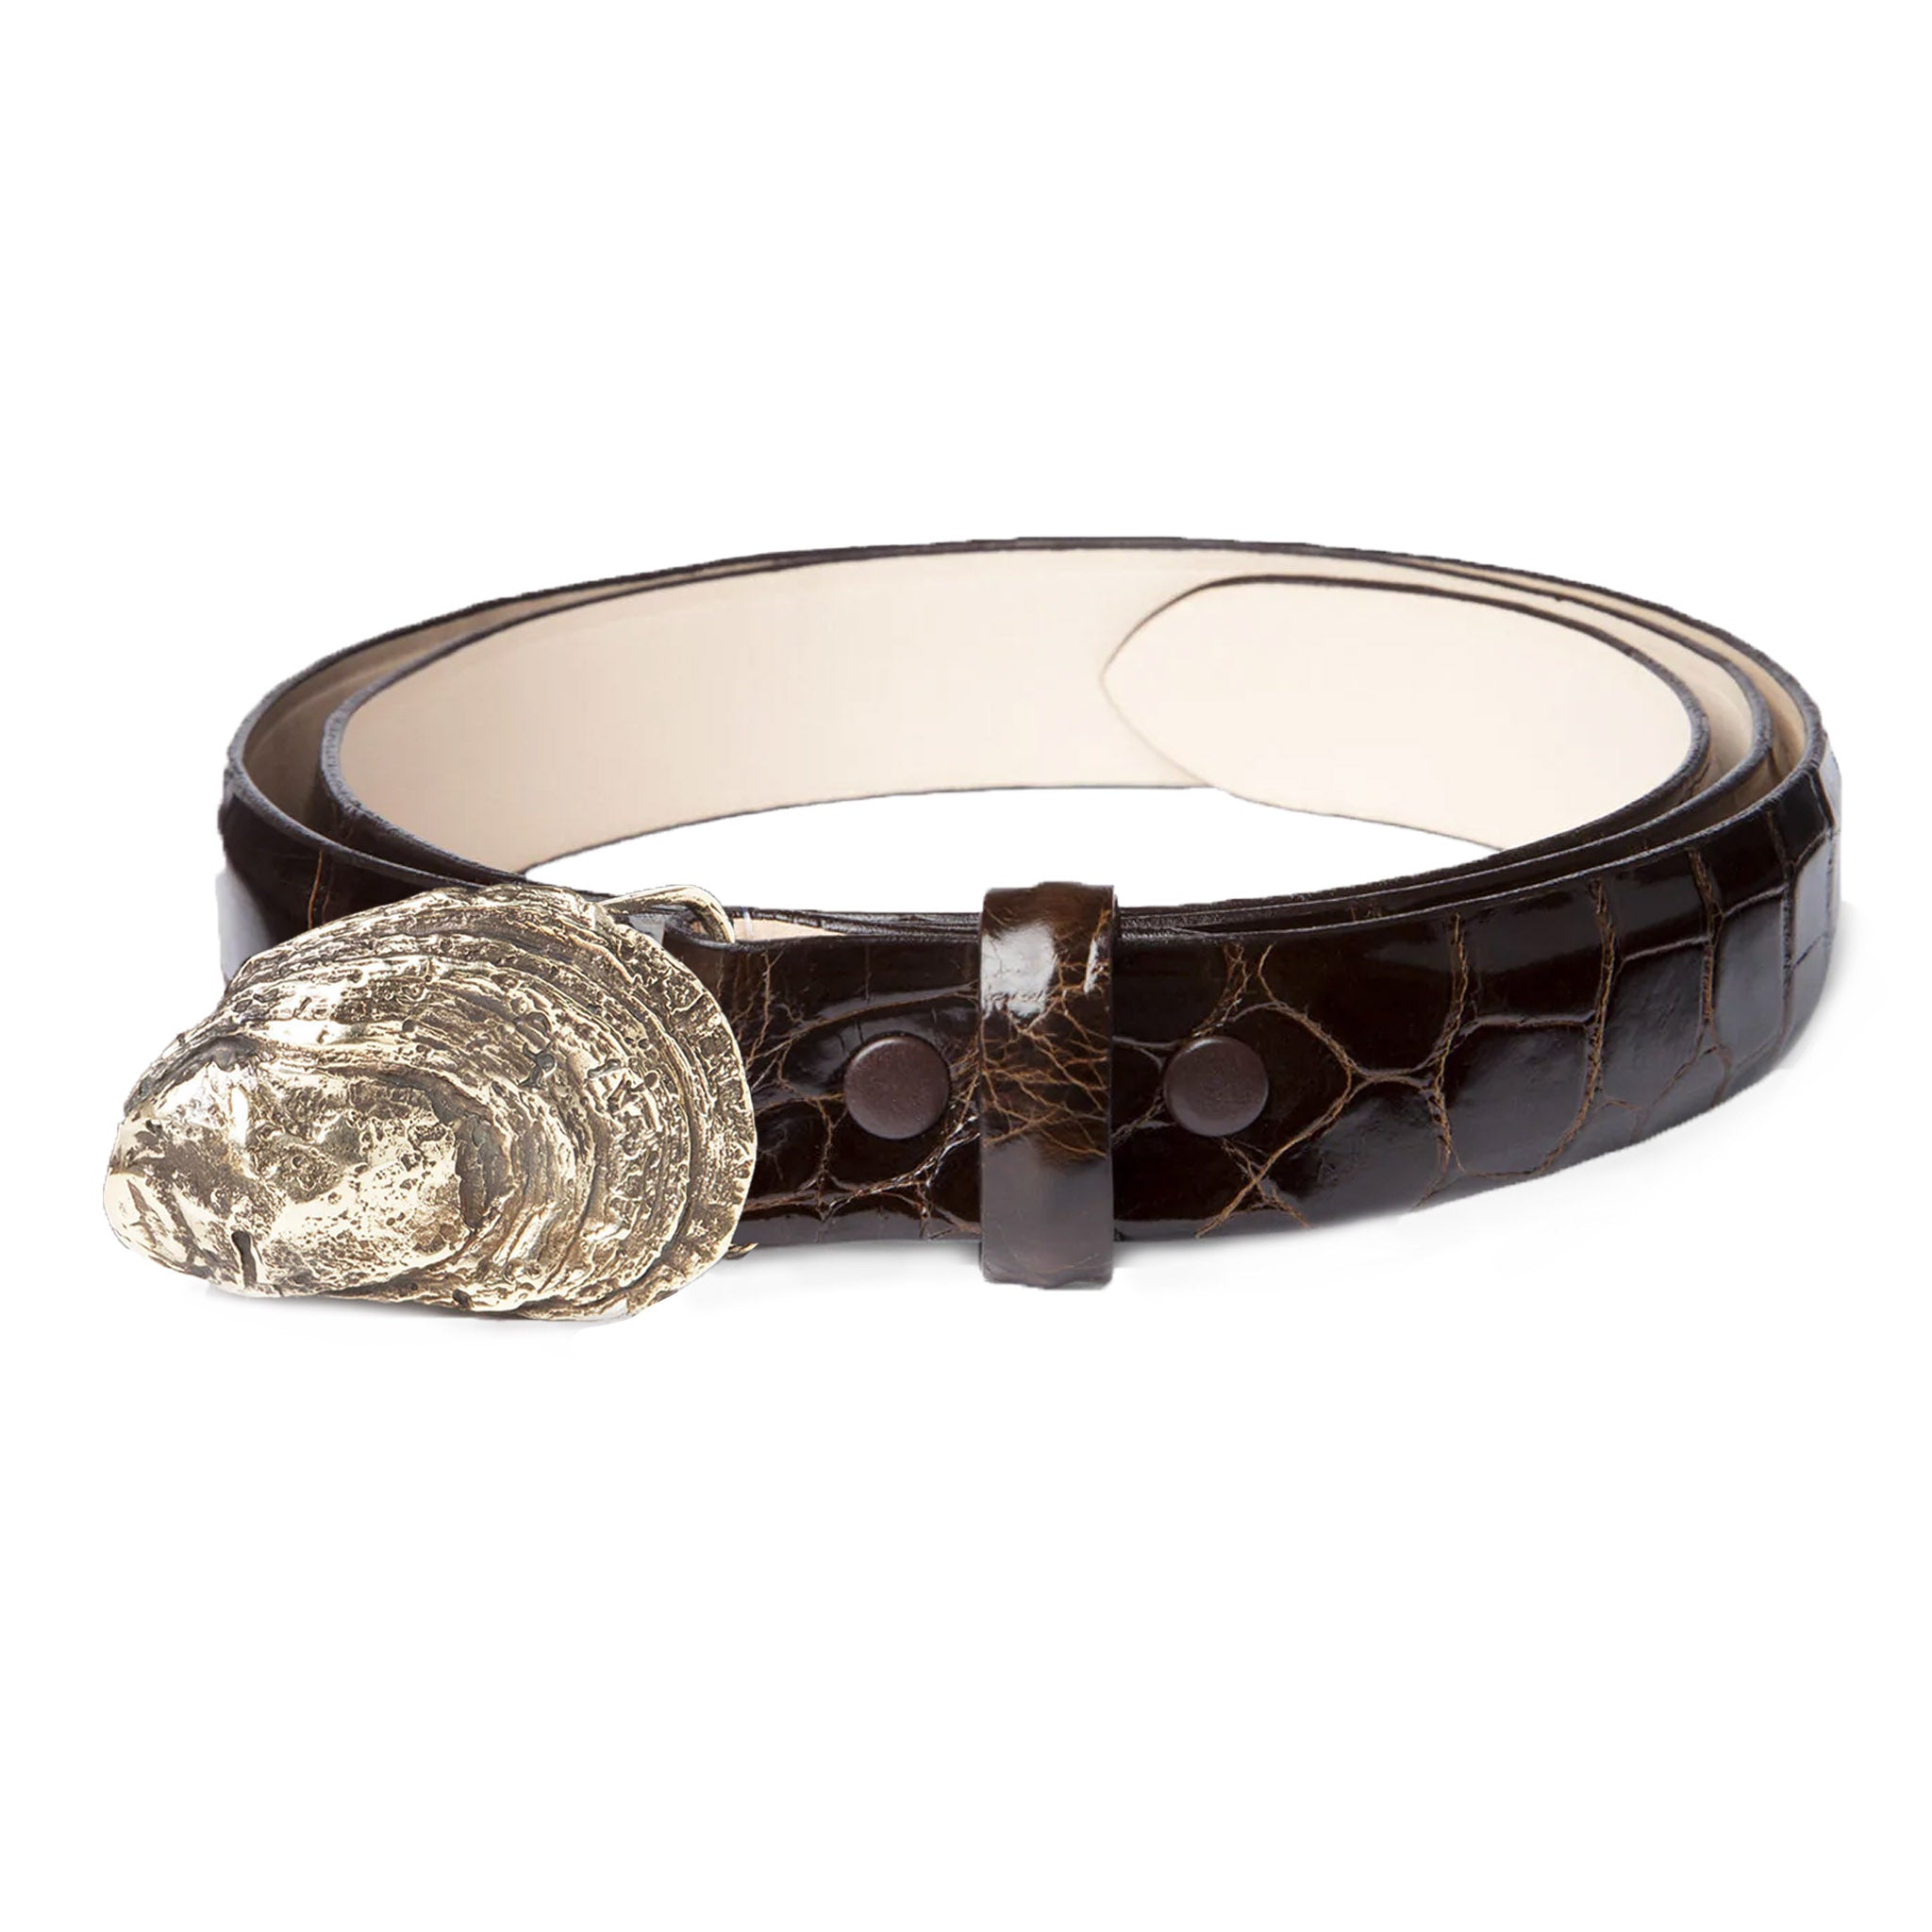 Oyster Shell Buckle with Glazed Brown Alligator Leather Belt Strap